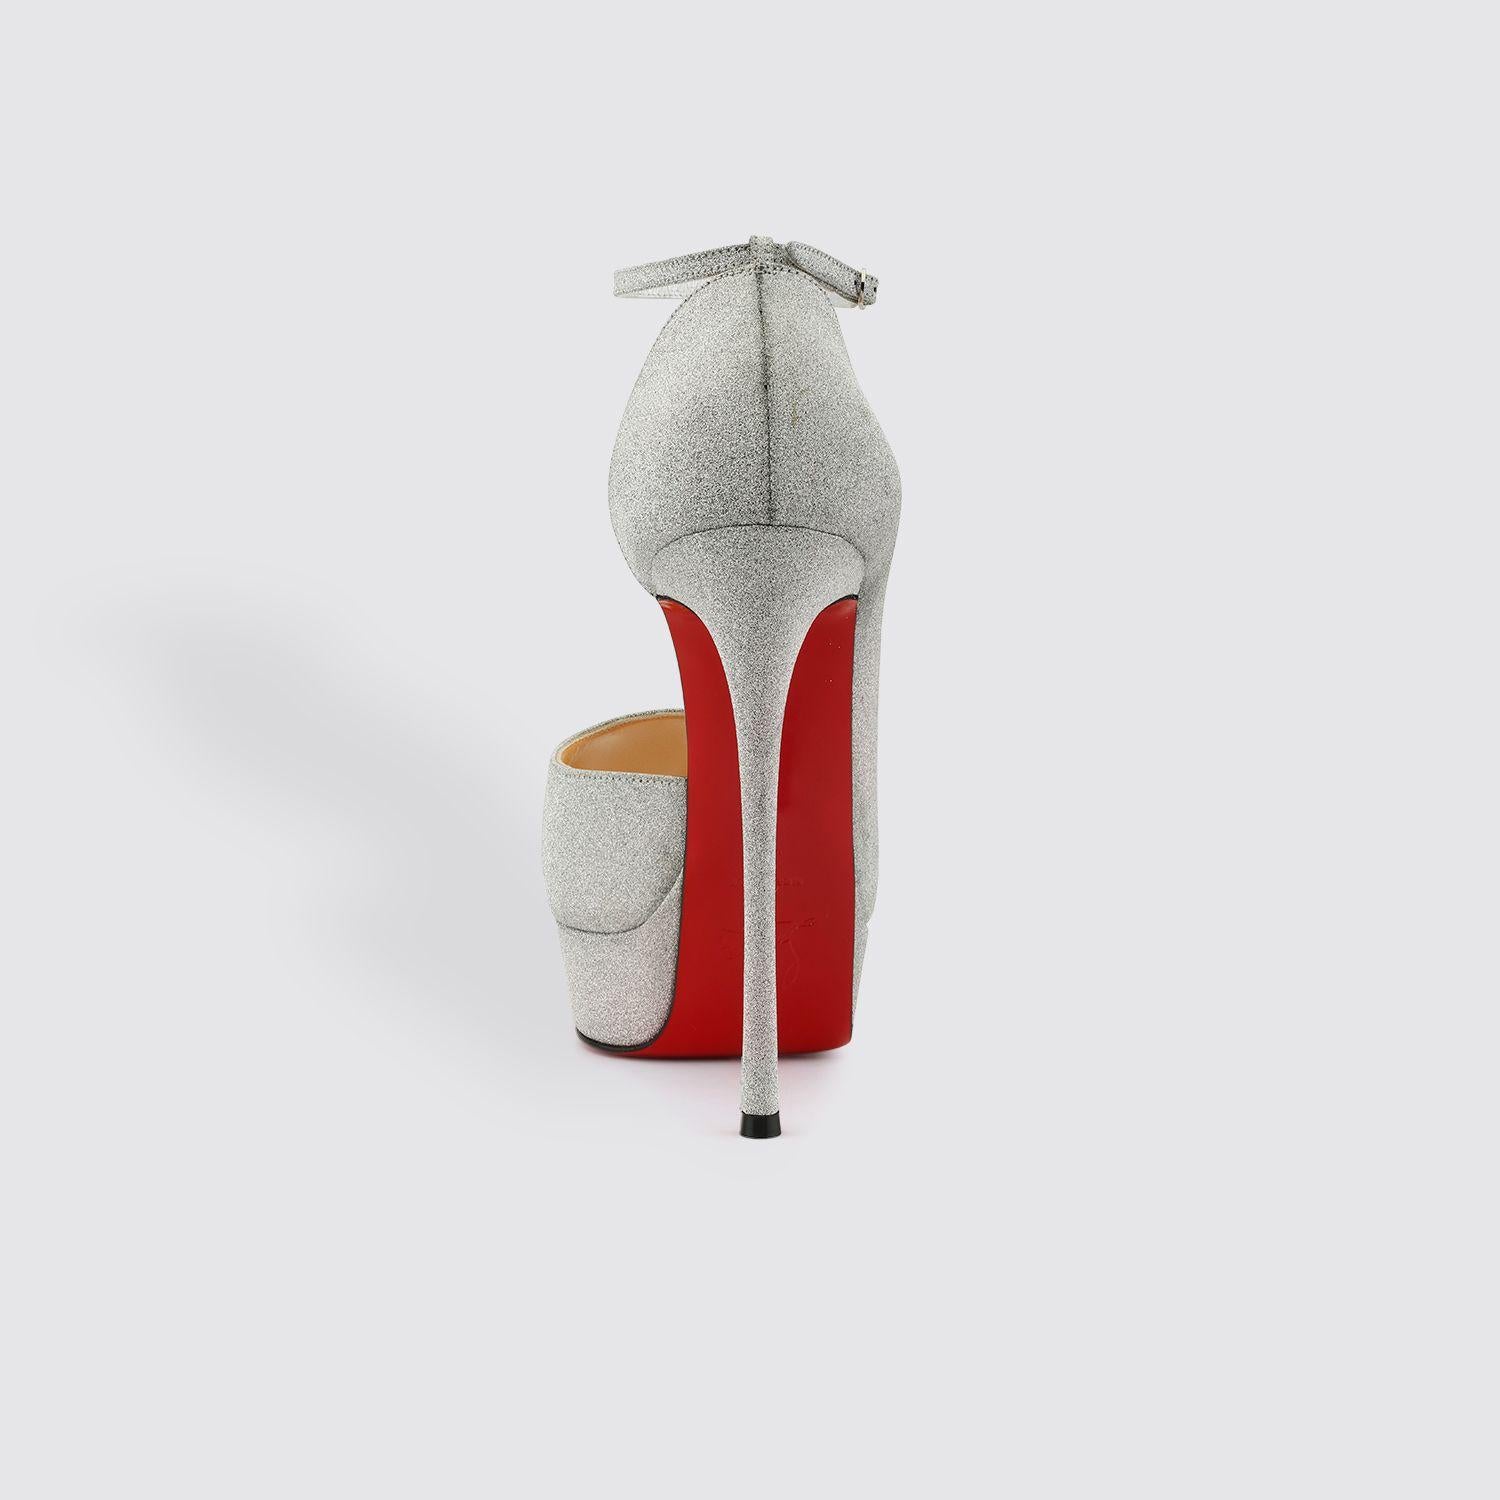 The Round Chick Alta pump is noted for its heart-shaped notches at the ankle and the tip of its bold cut. Its wedge sole rises to a 150 mm heel. Its sophisticated and elegant asymmetrical upper is underscored by discreet topstitching and enhanced by